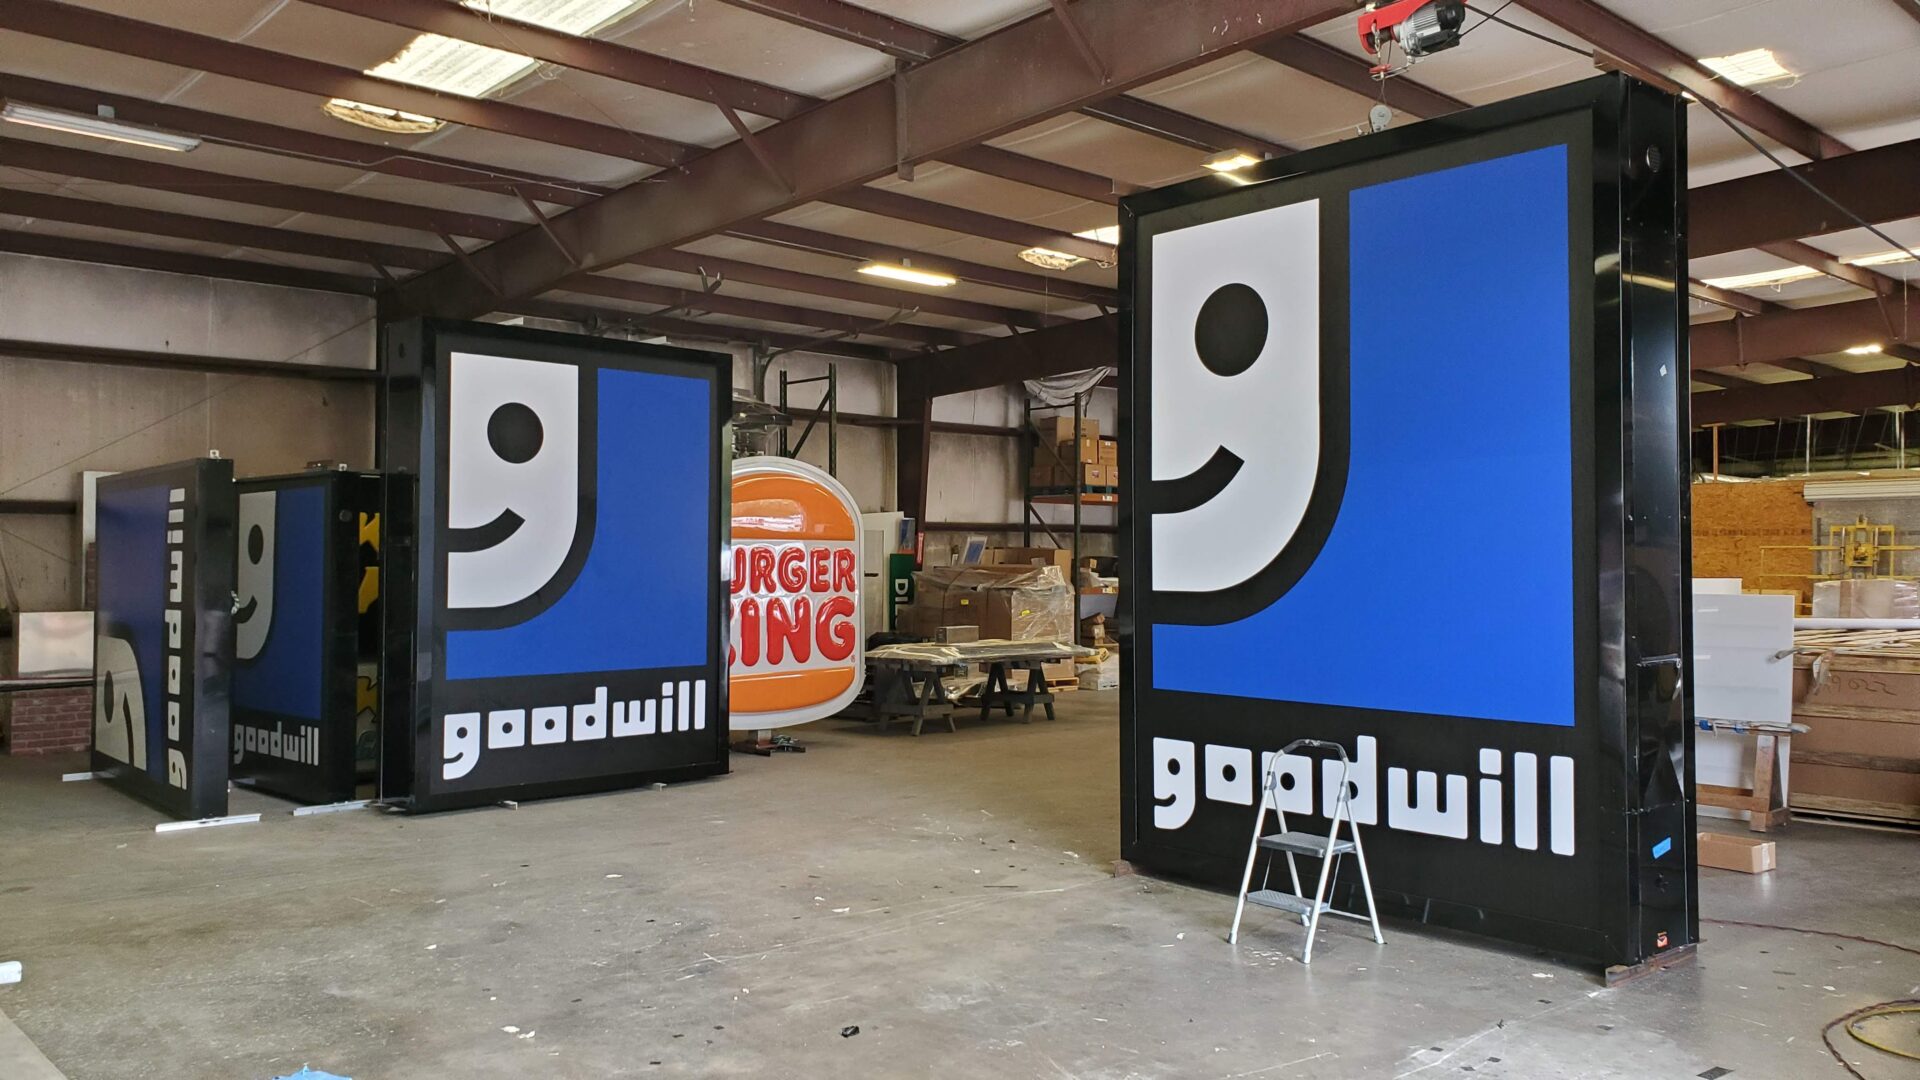 Goodwill sign board in blue and black